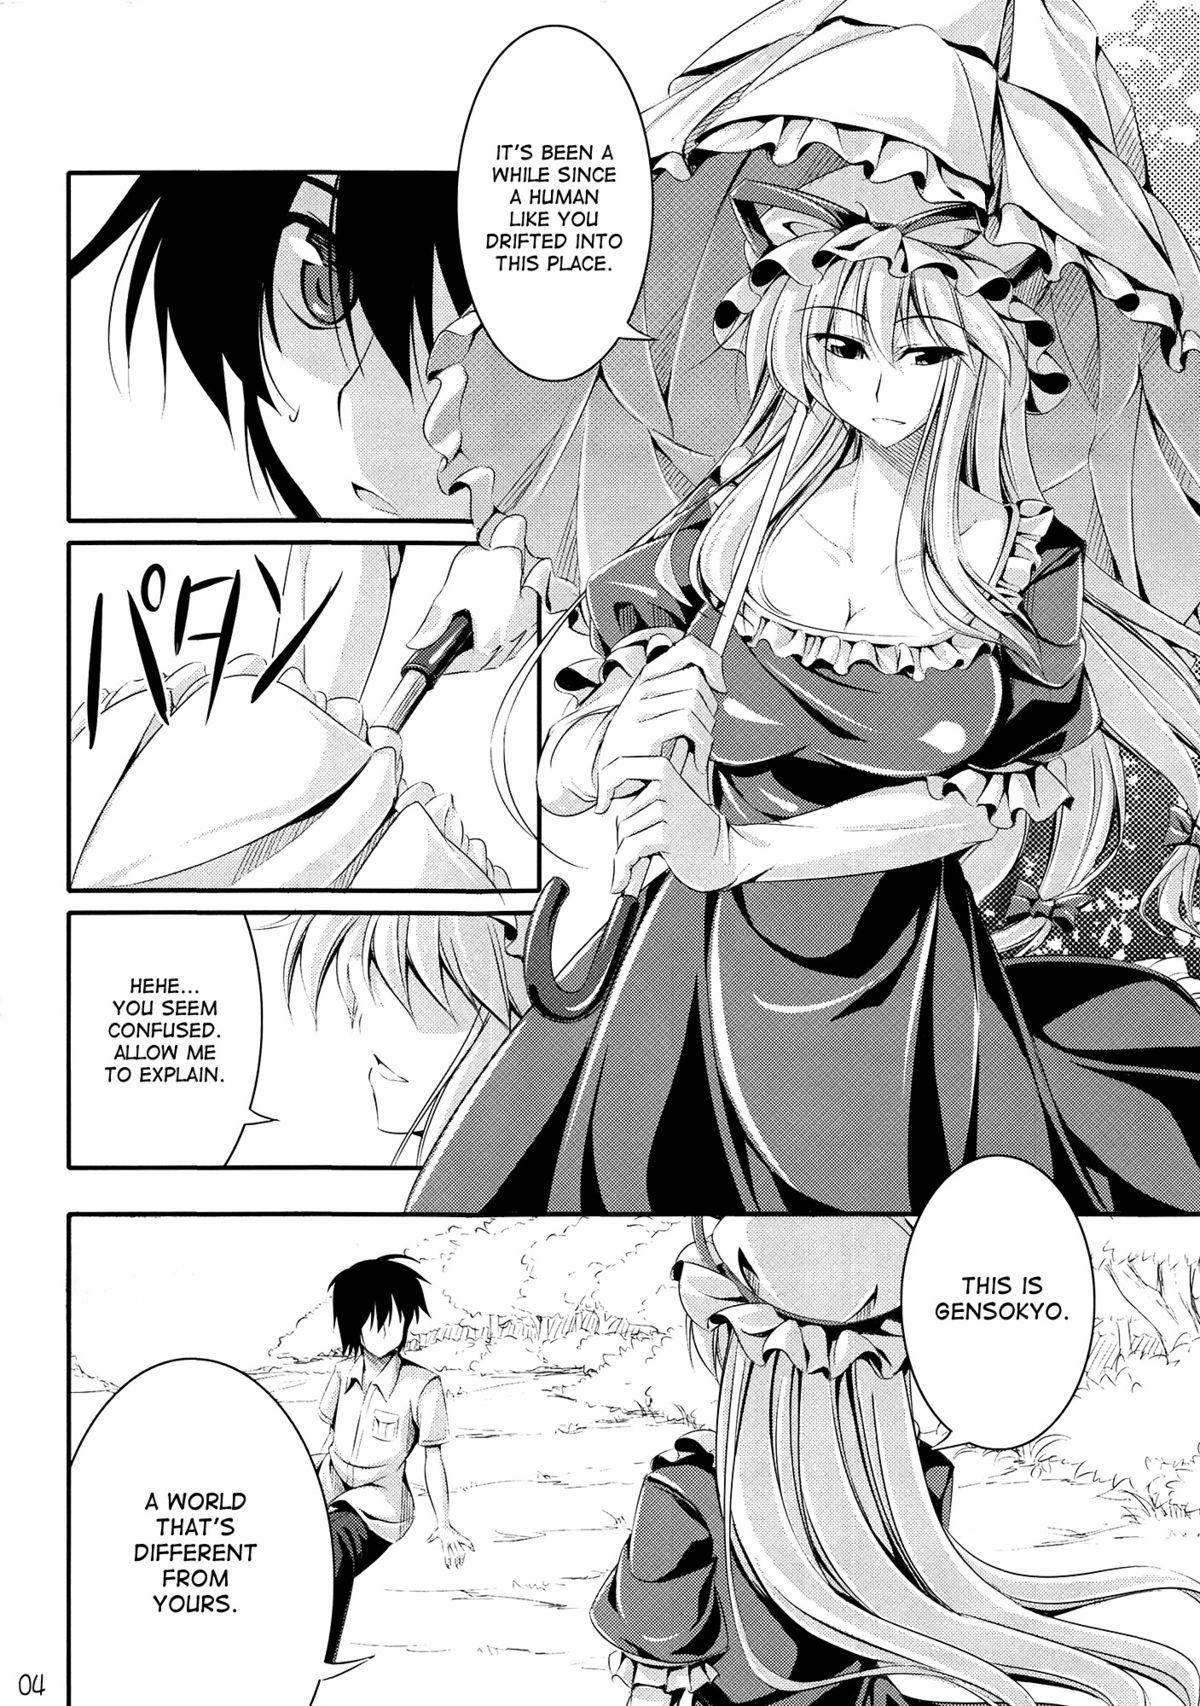 Big Dildo Welcome to Wonder World - Touhou project Rica - Page 3